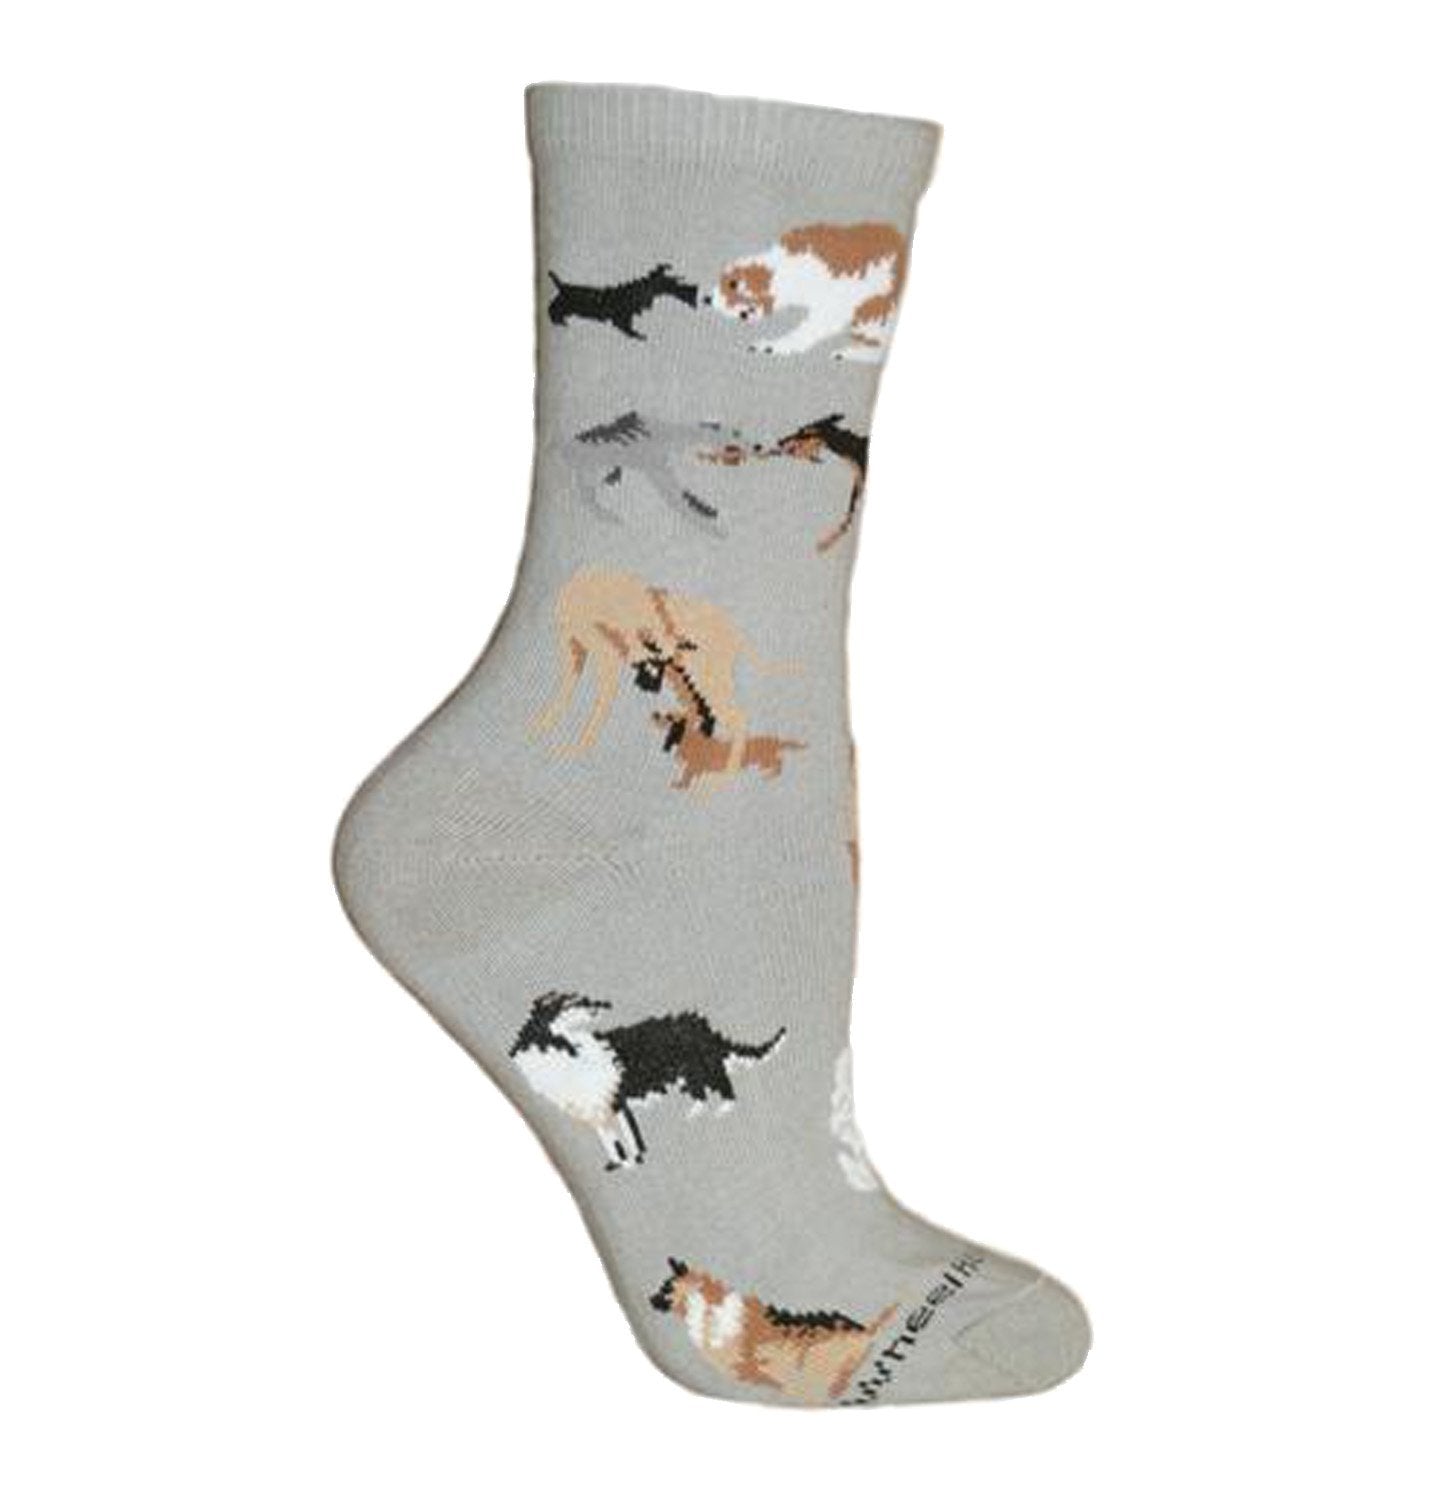 Animal Pride - Dogs All Over on Grey - Adult Cotton Crew Socks